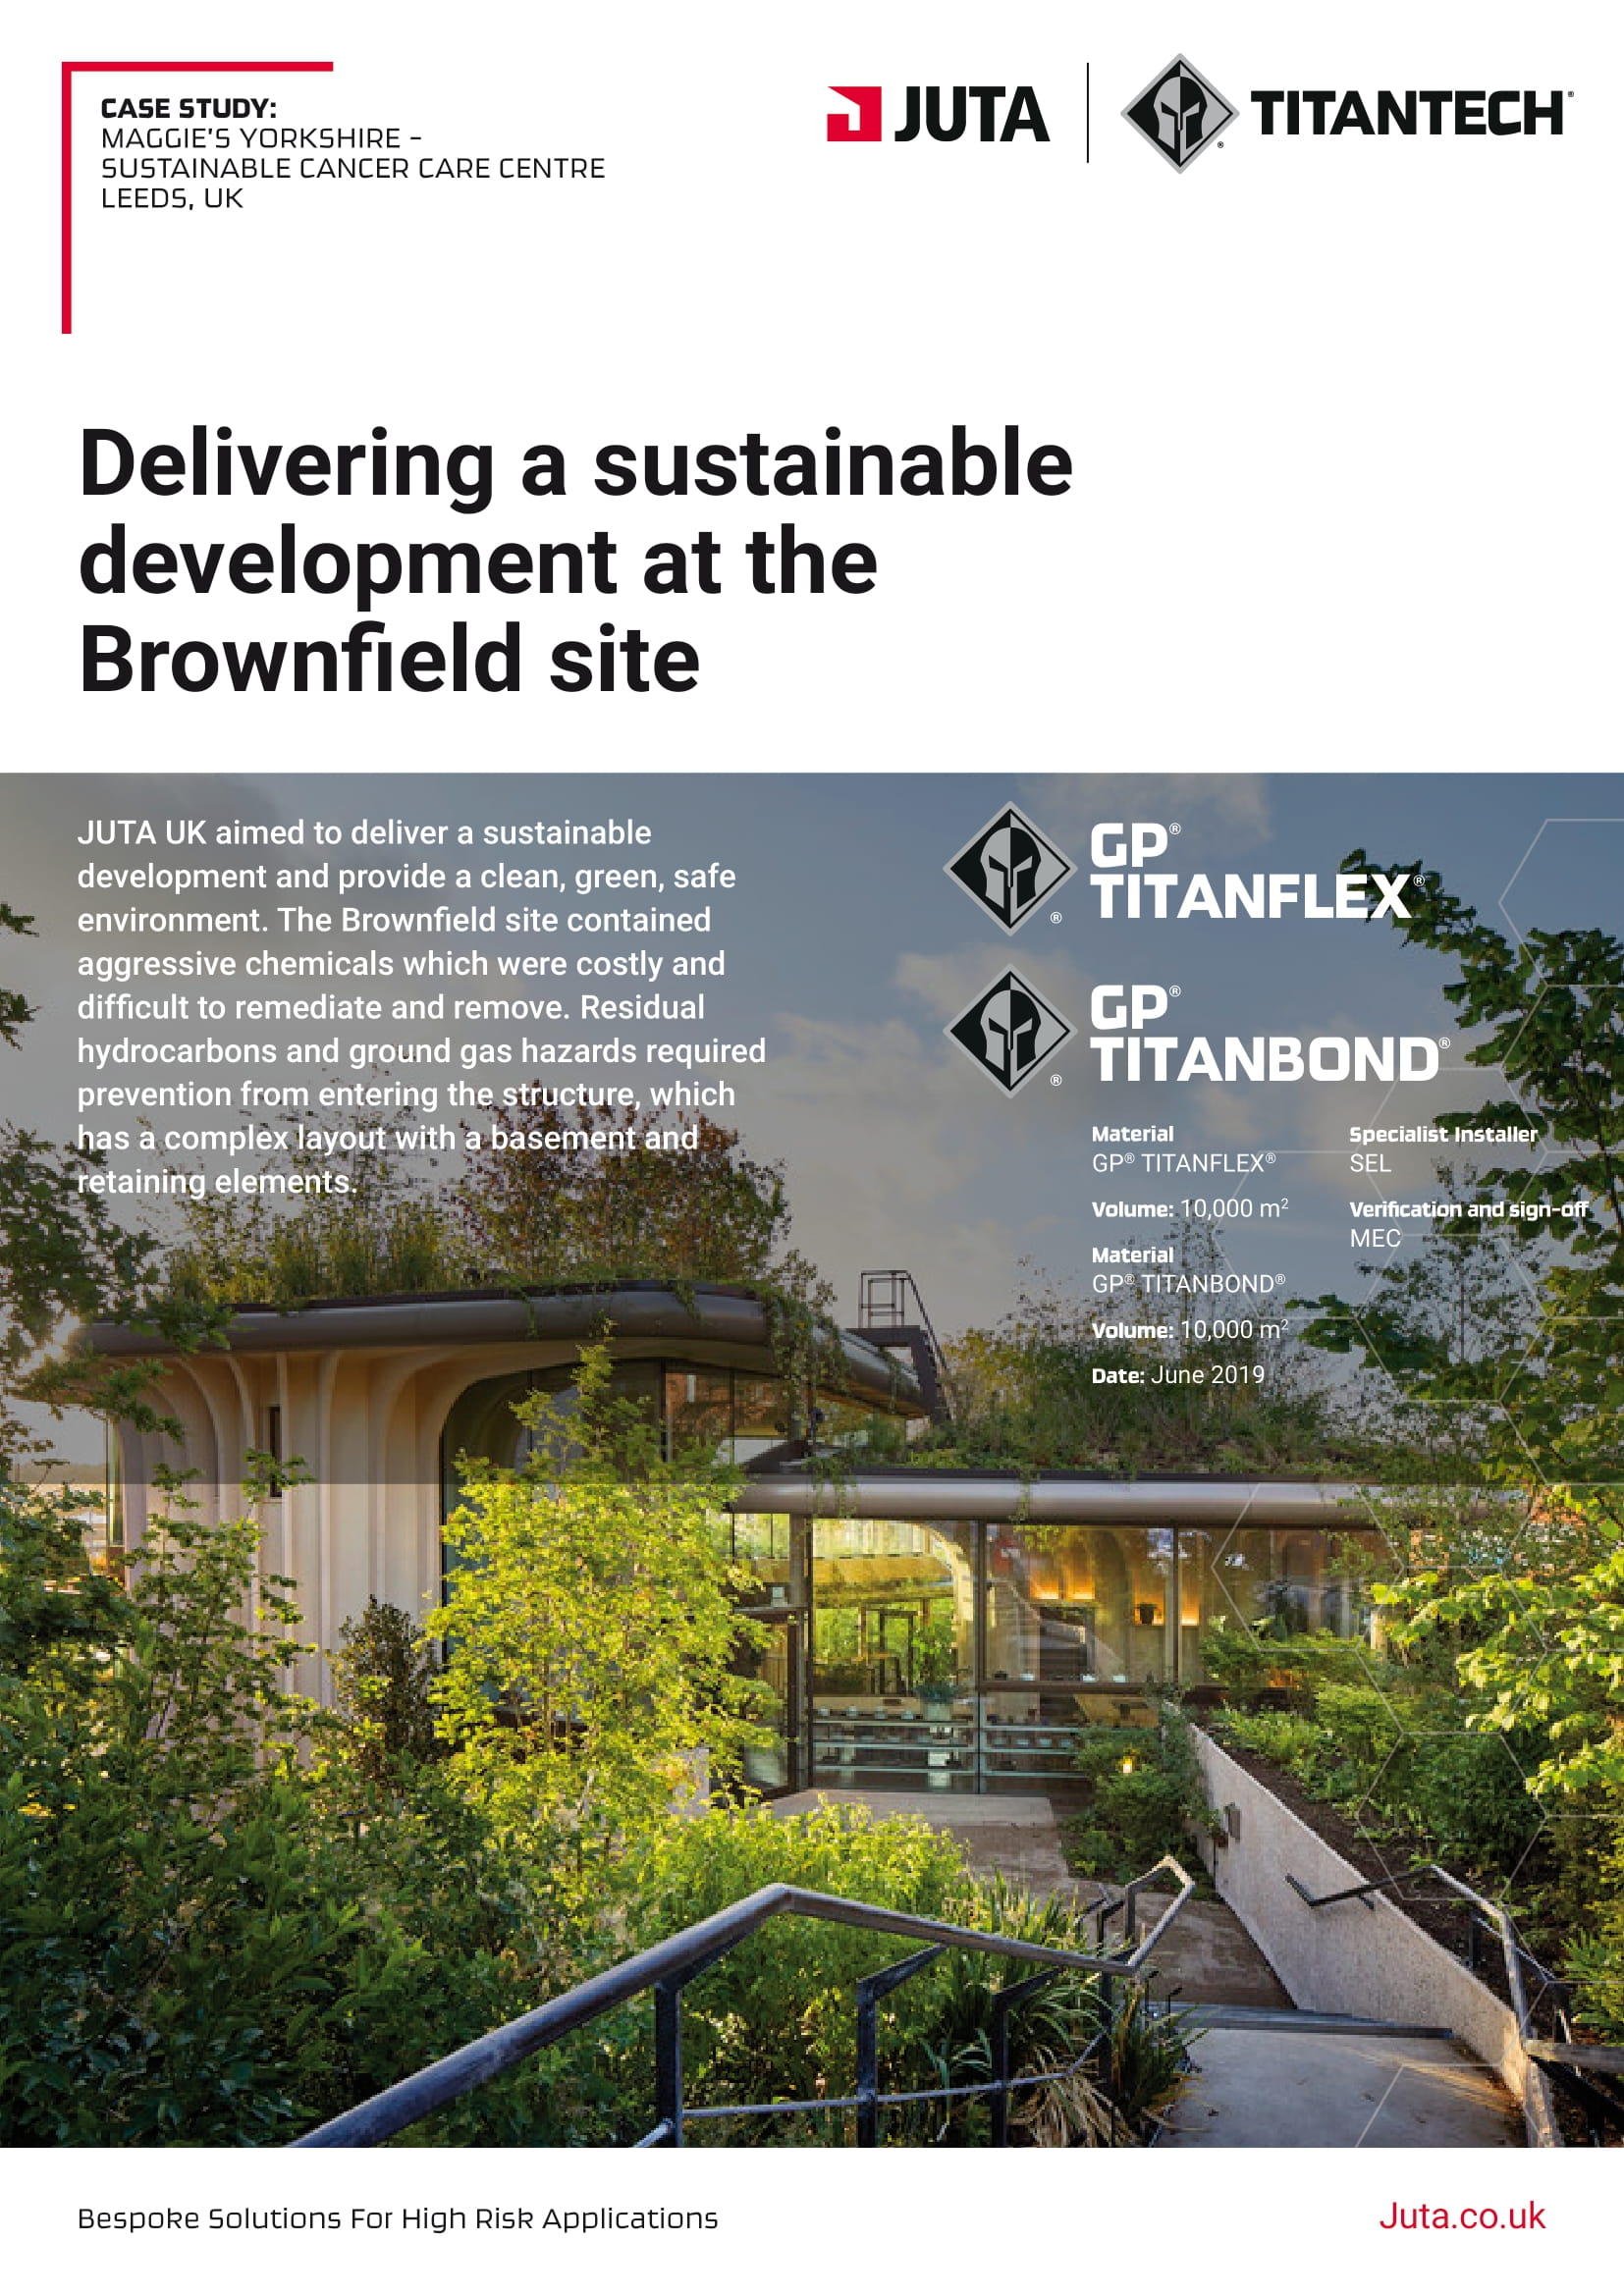 Maggie’s Sustainable Cancer Care Centre – Leeds PDF